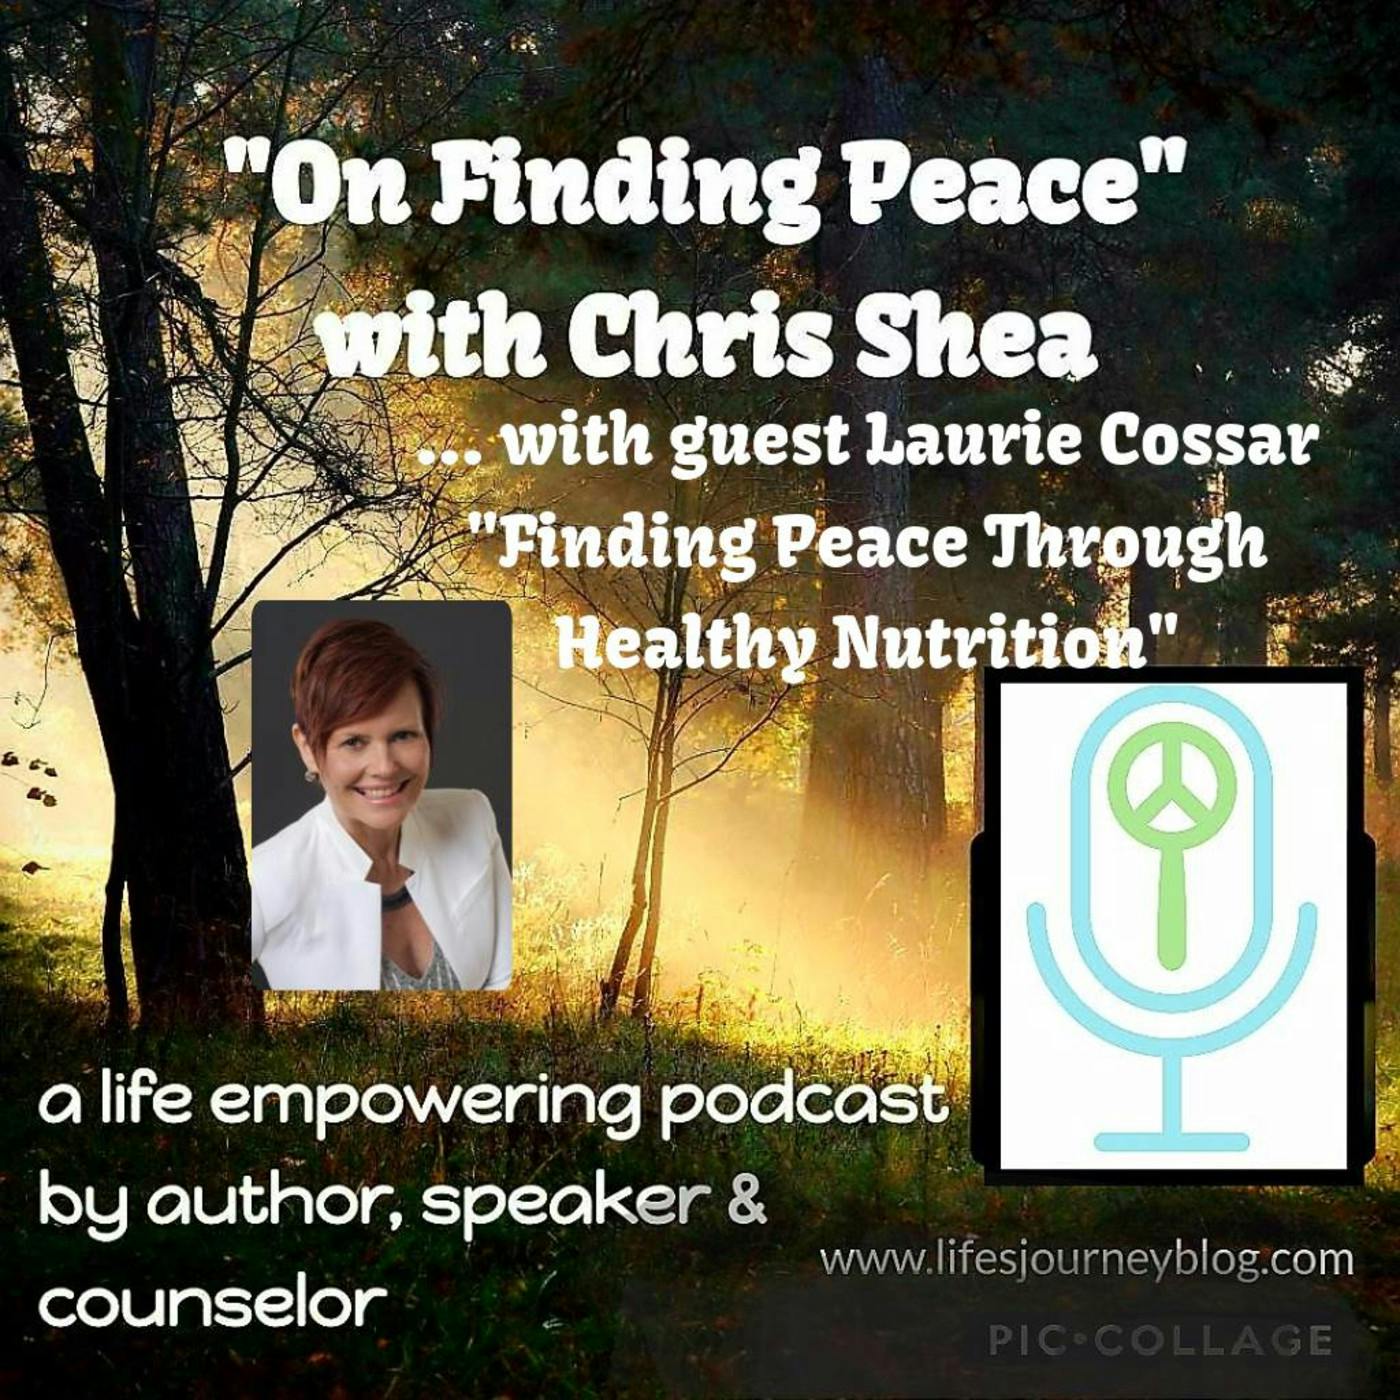 Finding Peace Through Healthy Nutrition with Laurie Cossar